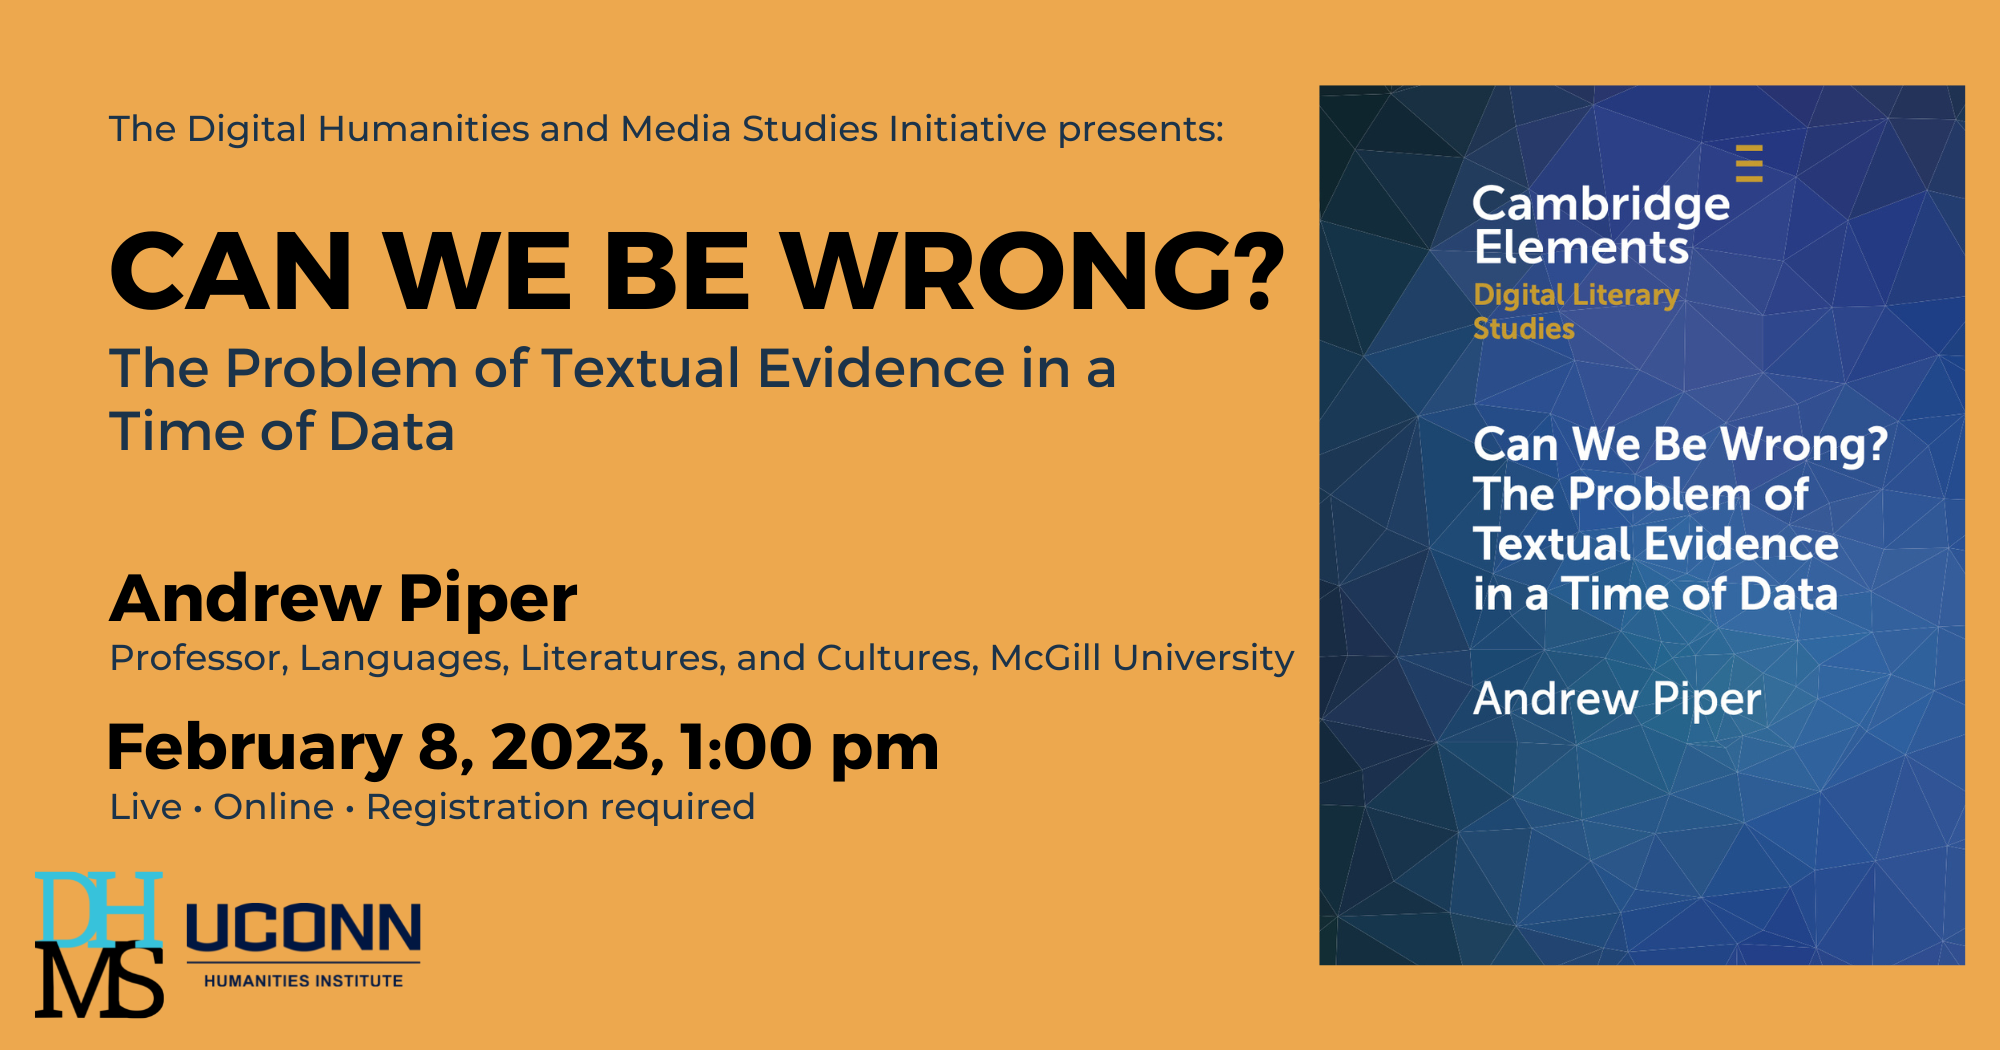 The Digital Humanities and Media Studies Initiative Present. Can We Be Wrong?: The Problem of Textual Evidence in a Time of Data. Andrew Piper, Professor, Languages, Literatures, and Cultures, McGill University. February 8, 2023, 1:00pm. Live. Online. Registration required.